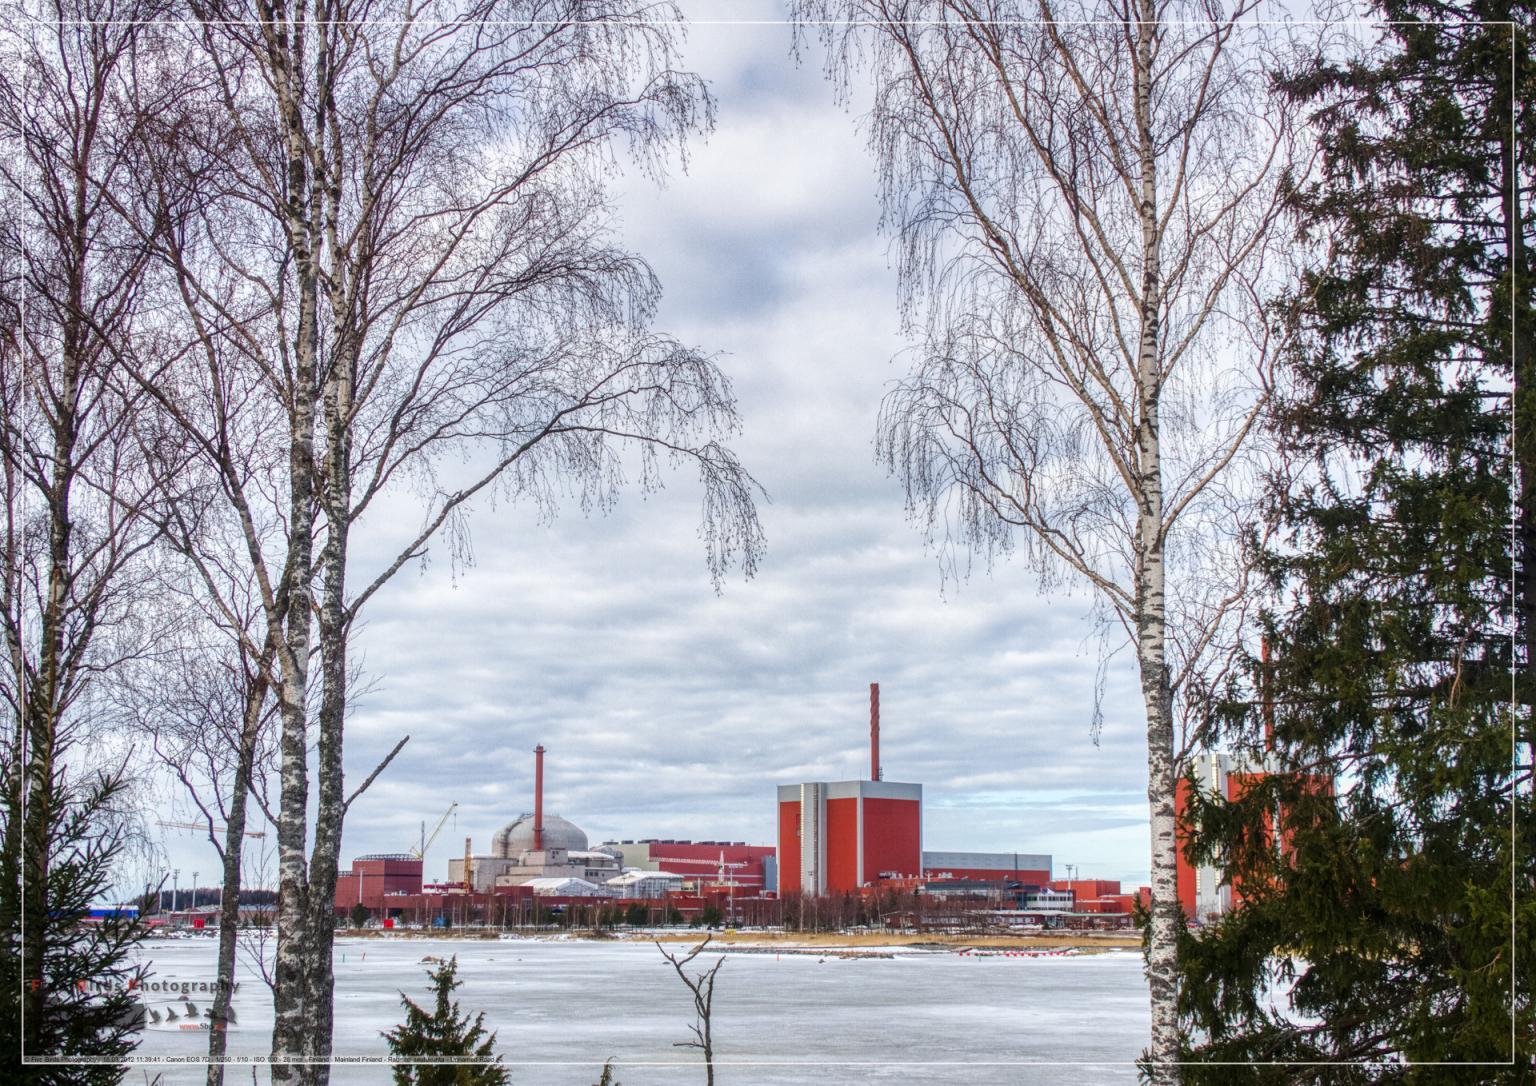 Image of the Finnish Olkiluoto 3 (left) and 1 (right) nuclear power plants